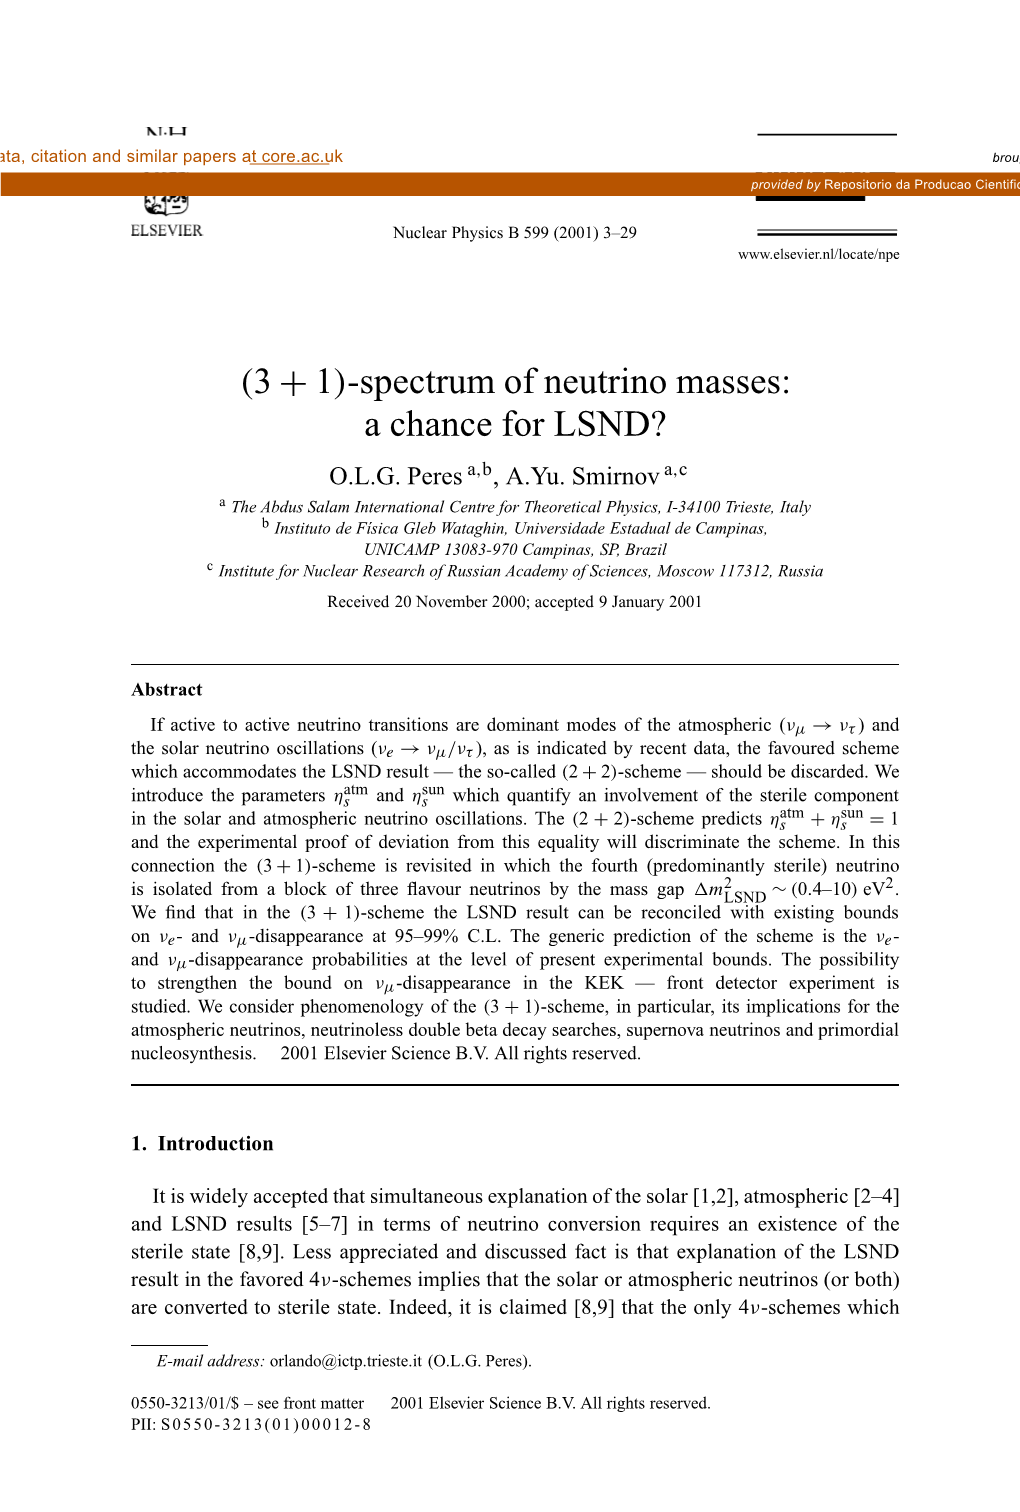 Spectrum of Neutrino Masses: a Chance for LSND? O.L.G